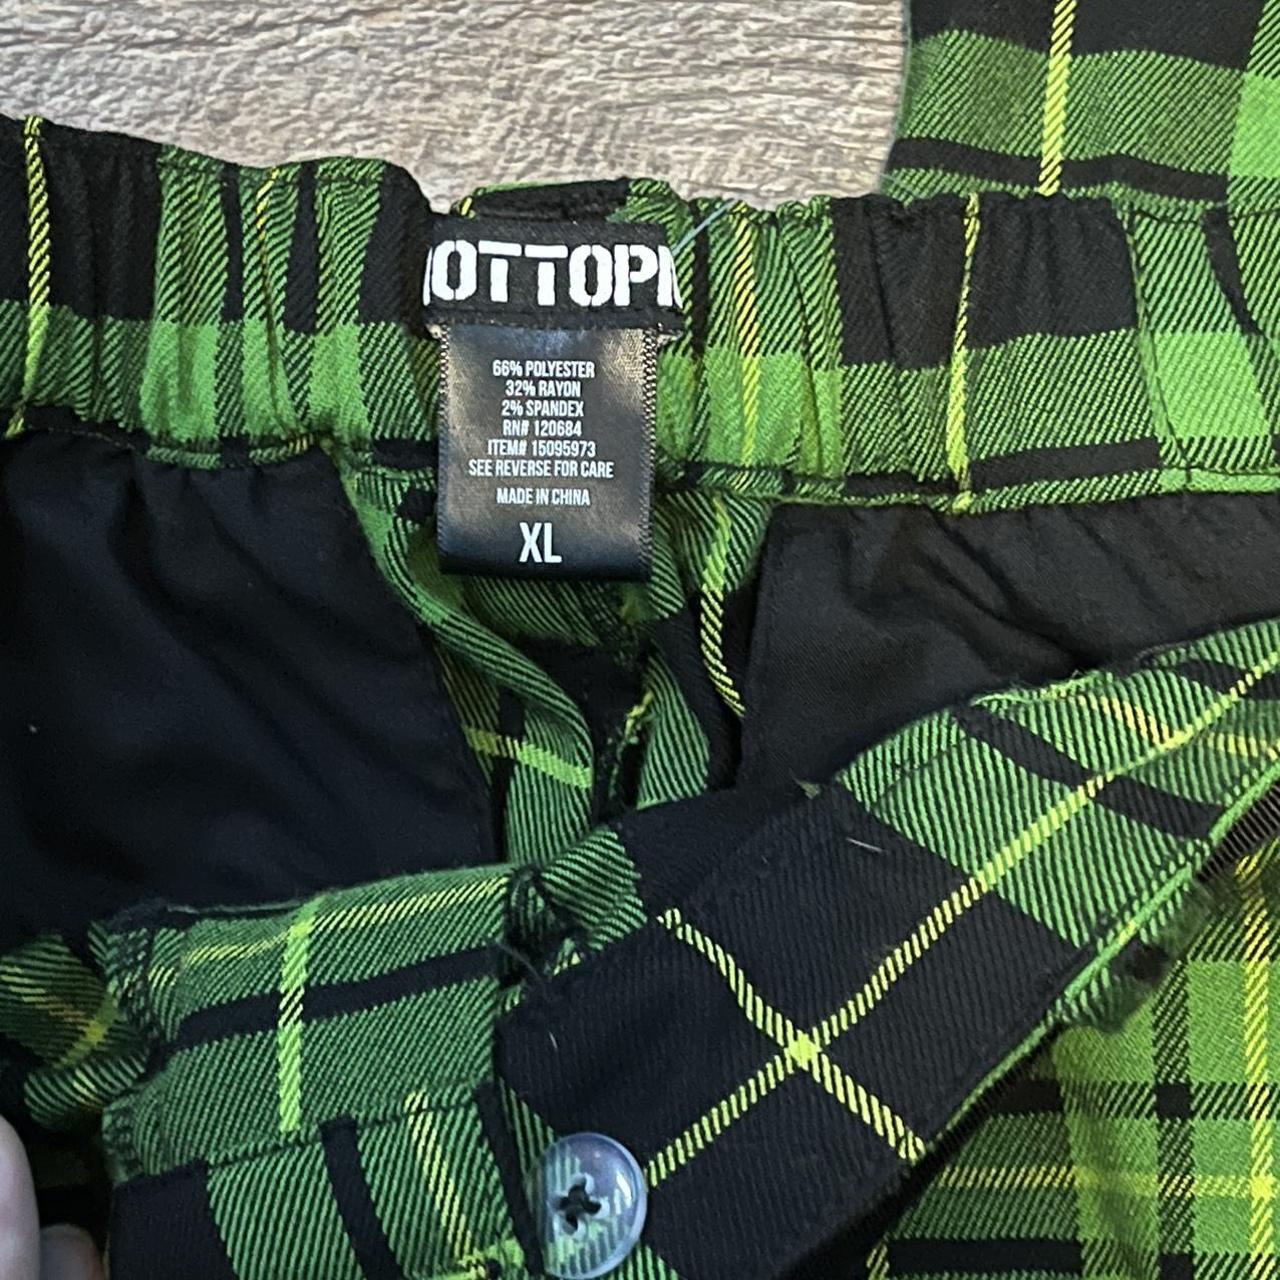 Hot topic brand neon green and black plaid pants... - Depop